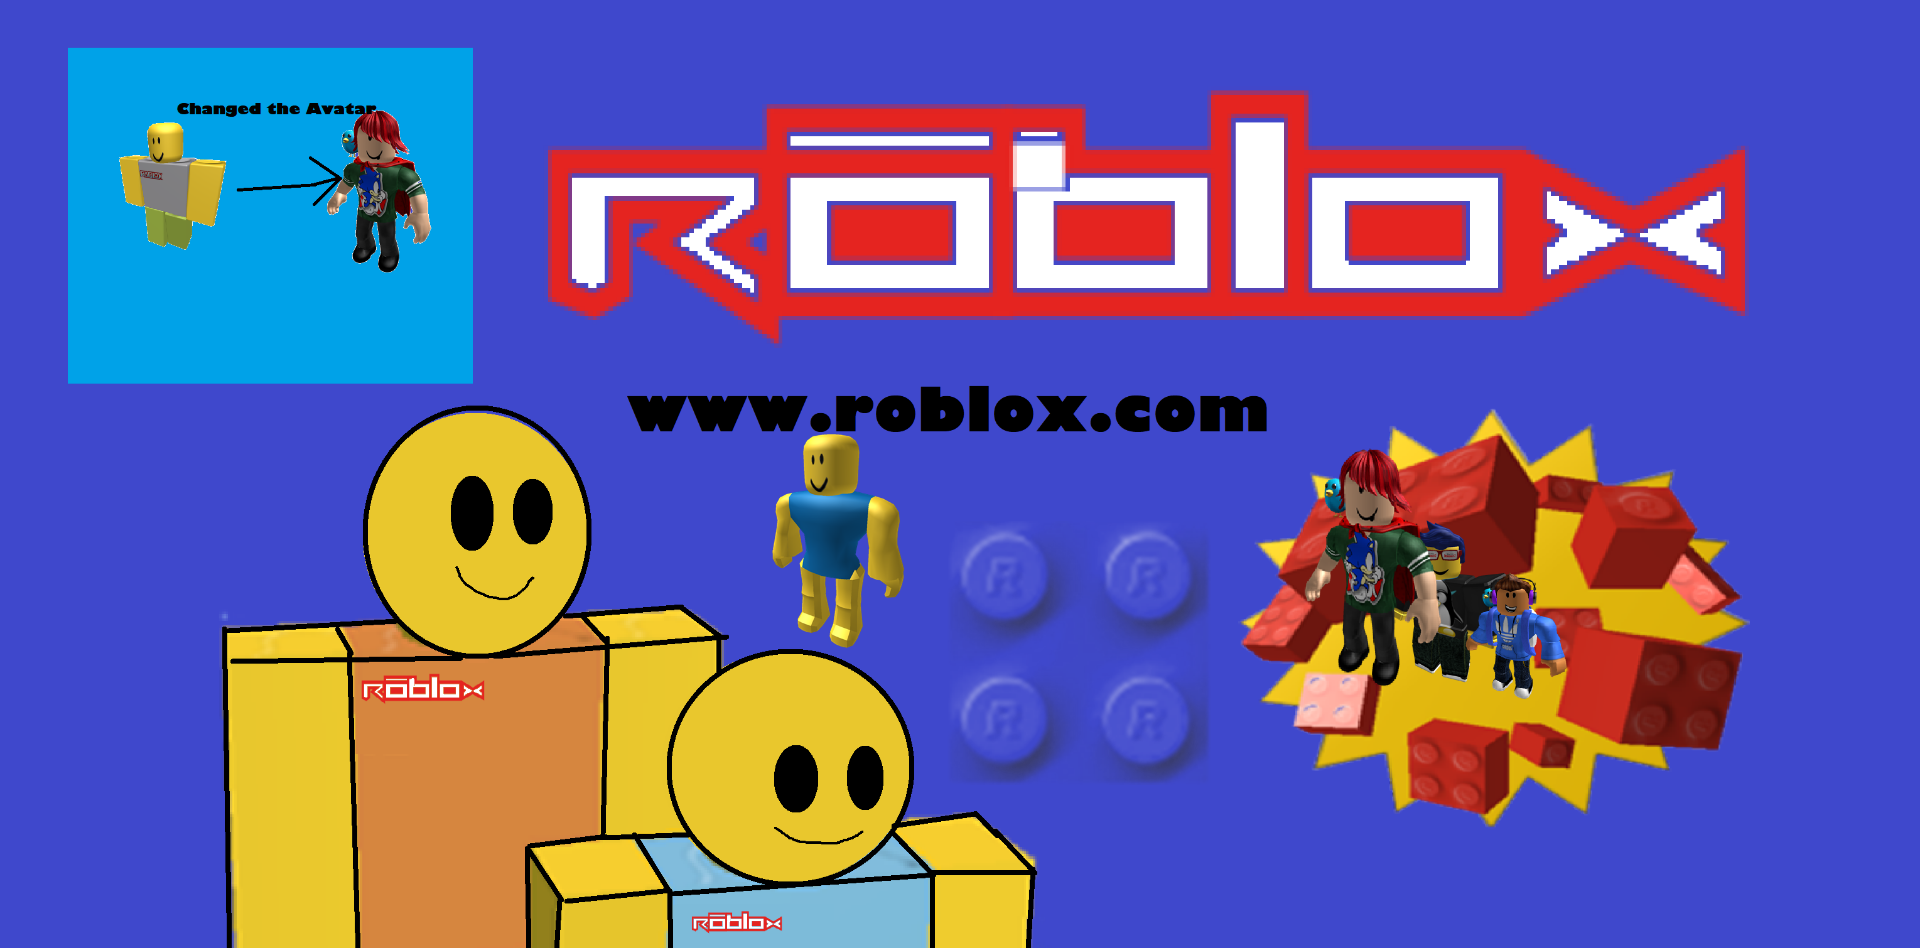 Roblox O Png - roblox logo logo met zwitserse vlag transparent png 1200x1200 free download on nicepng